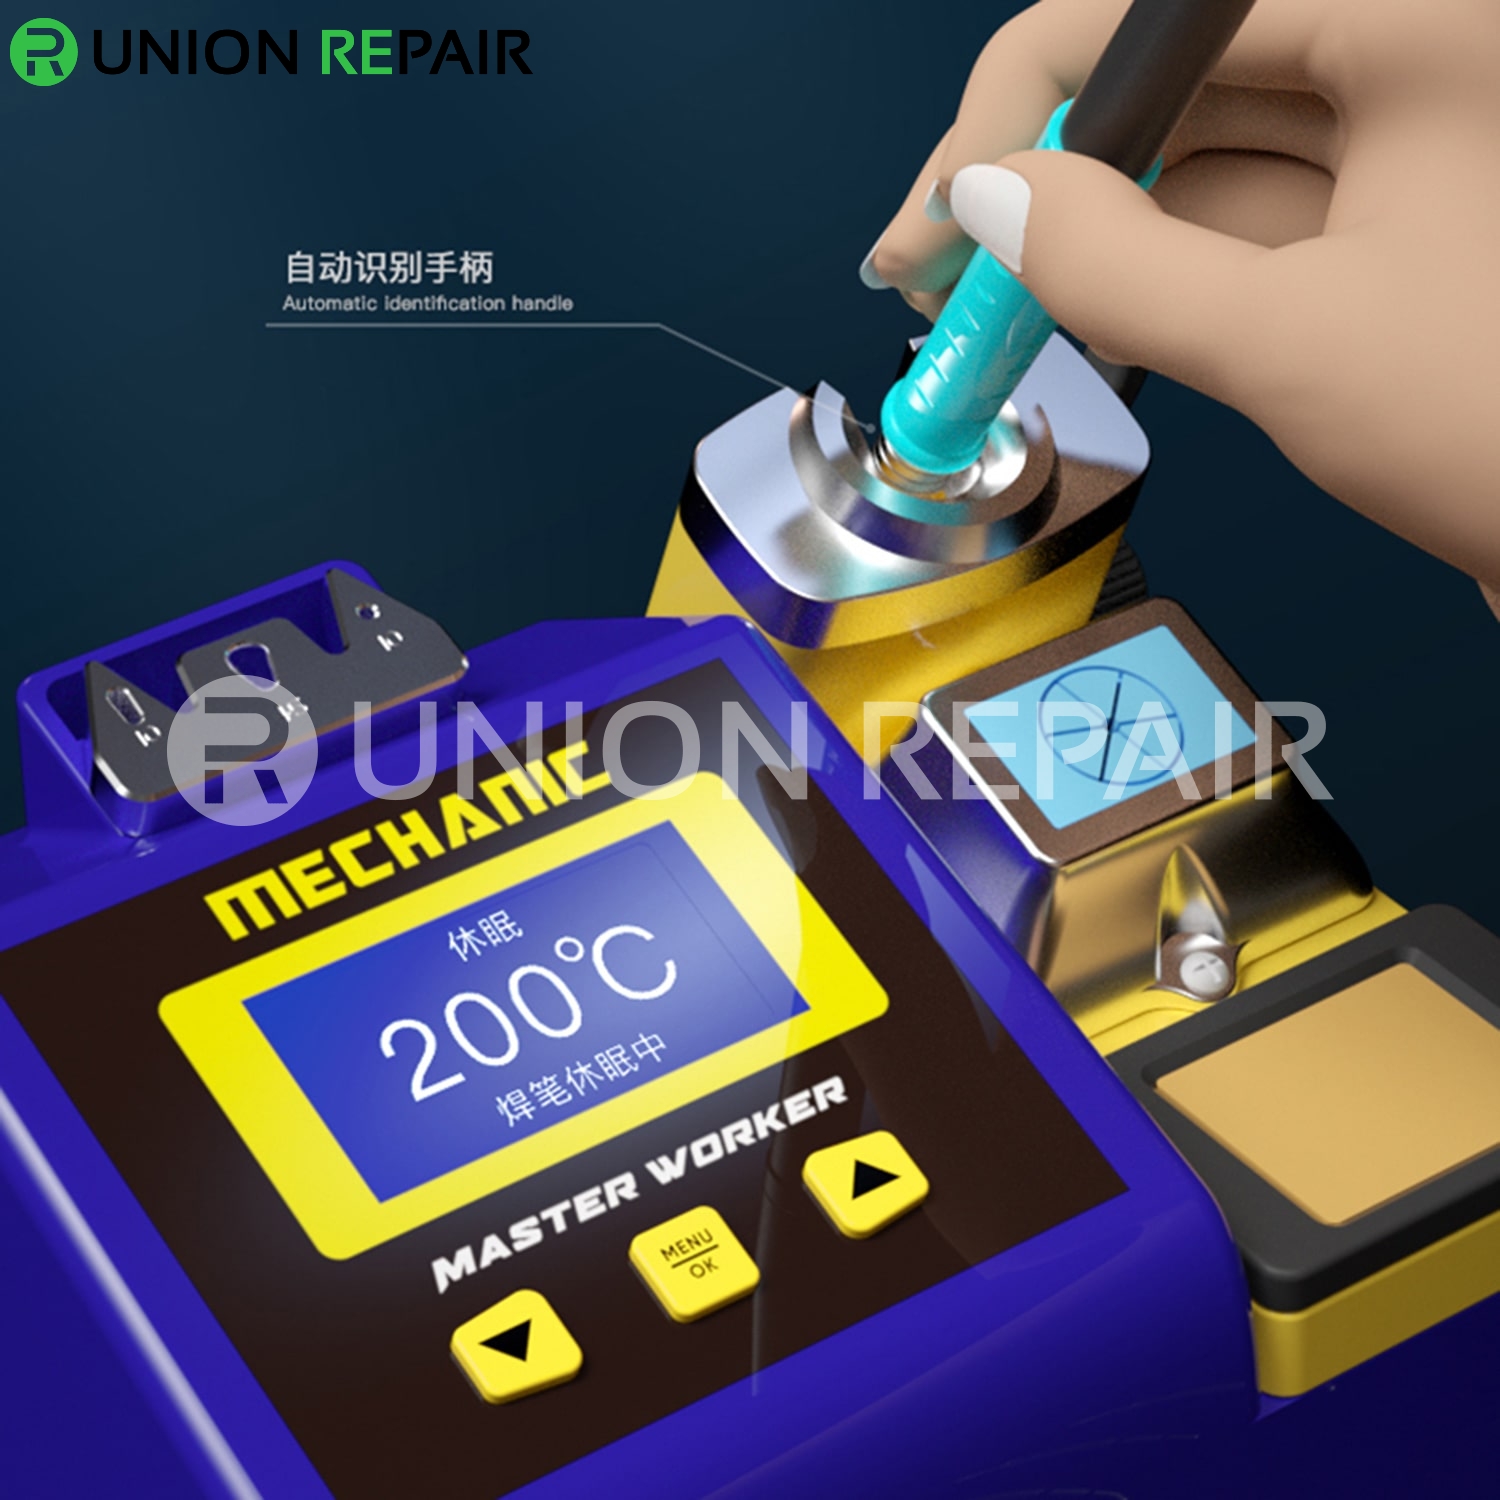 Mechanic MA-SD01 Micro Nano Soldering Station for T245 /T210 /T115 Handle Iron Head